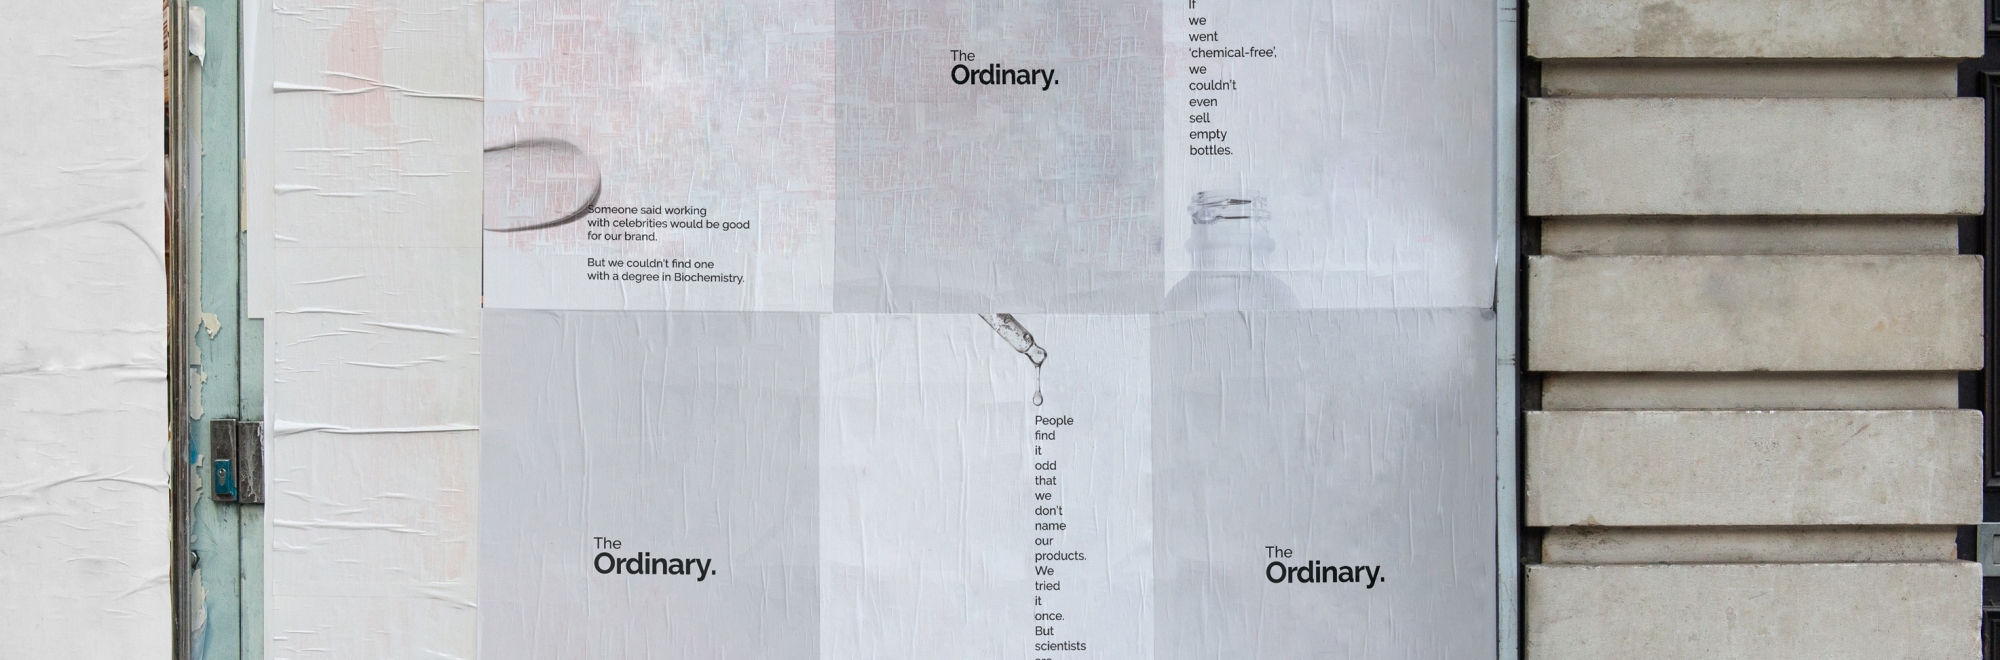 Why The Ordinary’s anti-copywriting stance is good copywriting